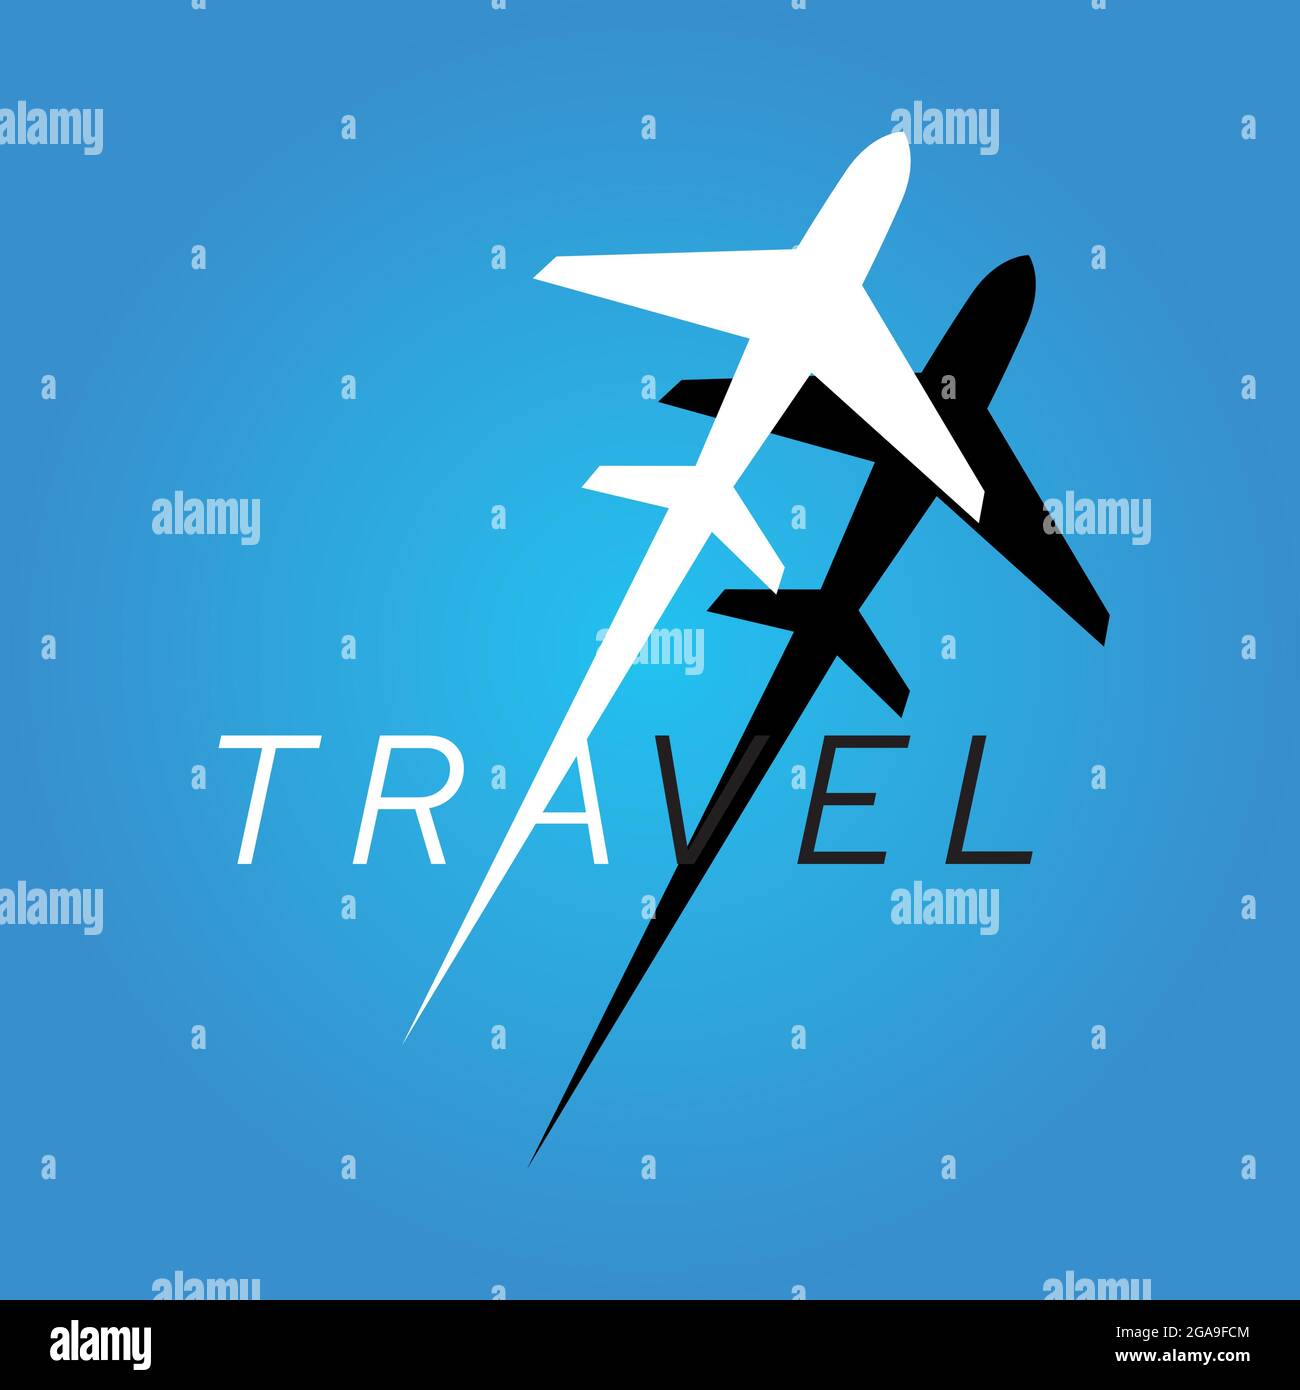 Creative Airplane Travel Banner Design, Creative Travel and Airplane Design, Creative icon designs for airlines and planes. Stock Vector